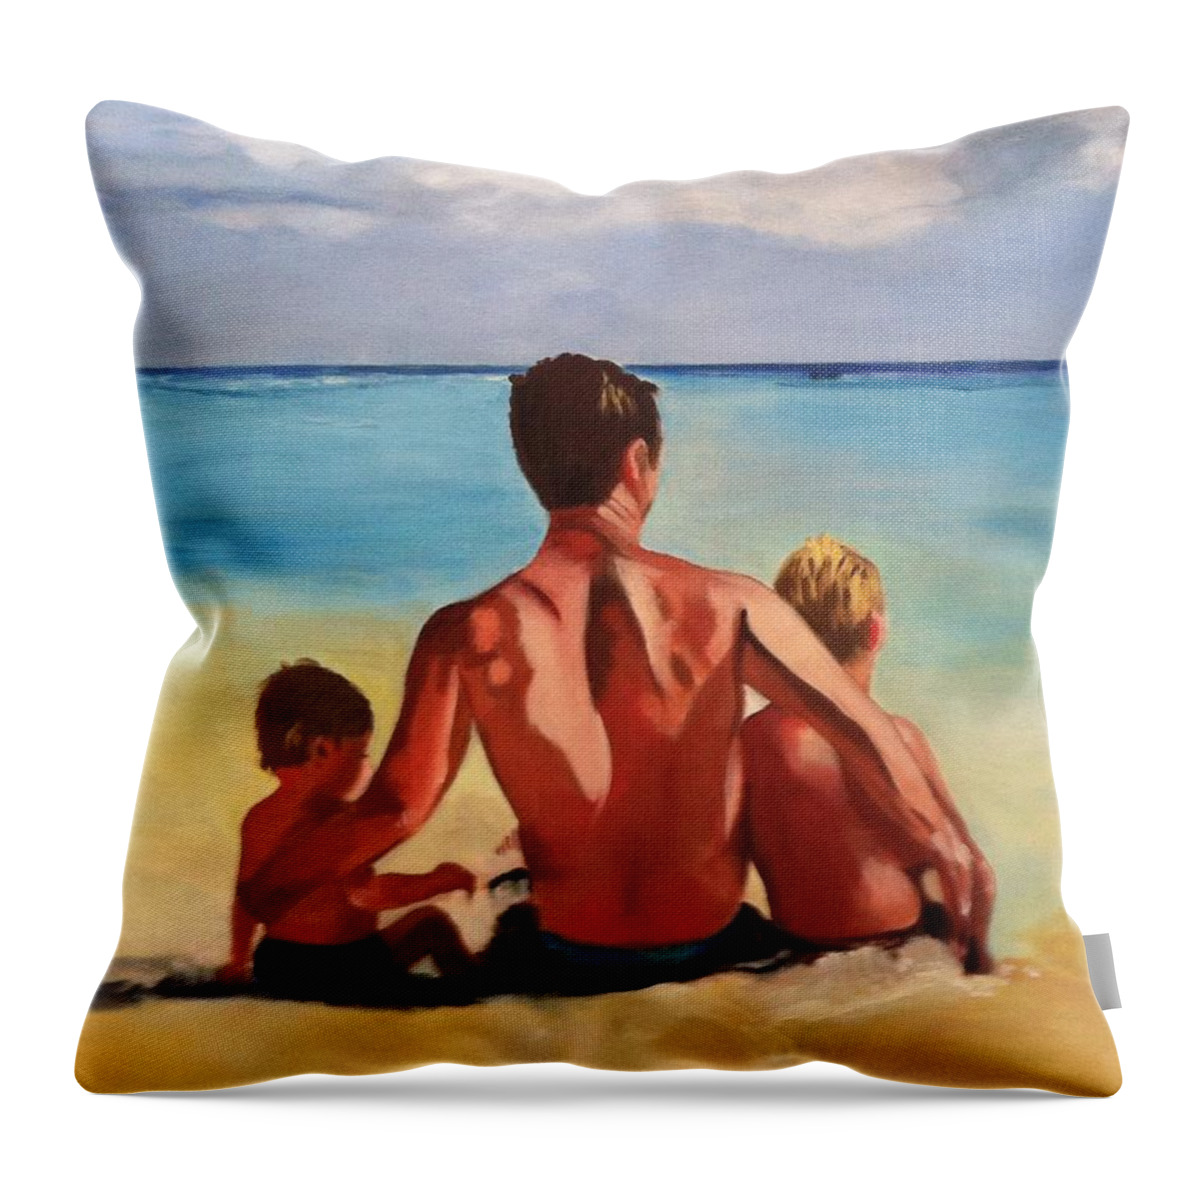 Sun Throw Pillow featuring the painting Cayman Holiday by Juliette Becker